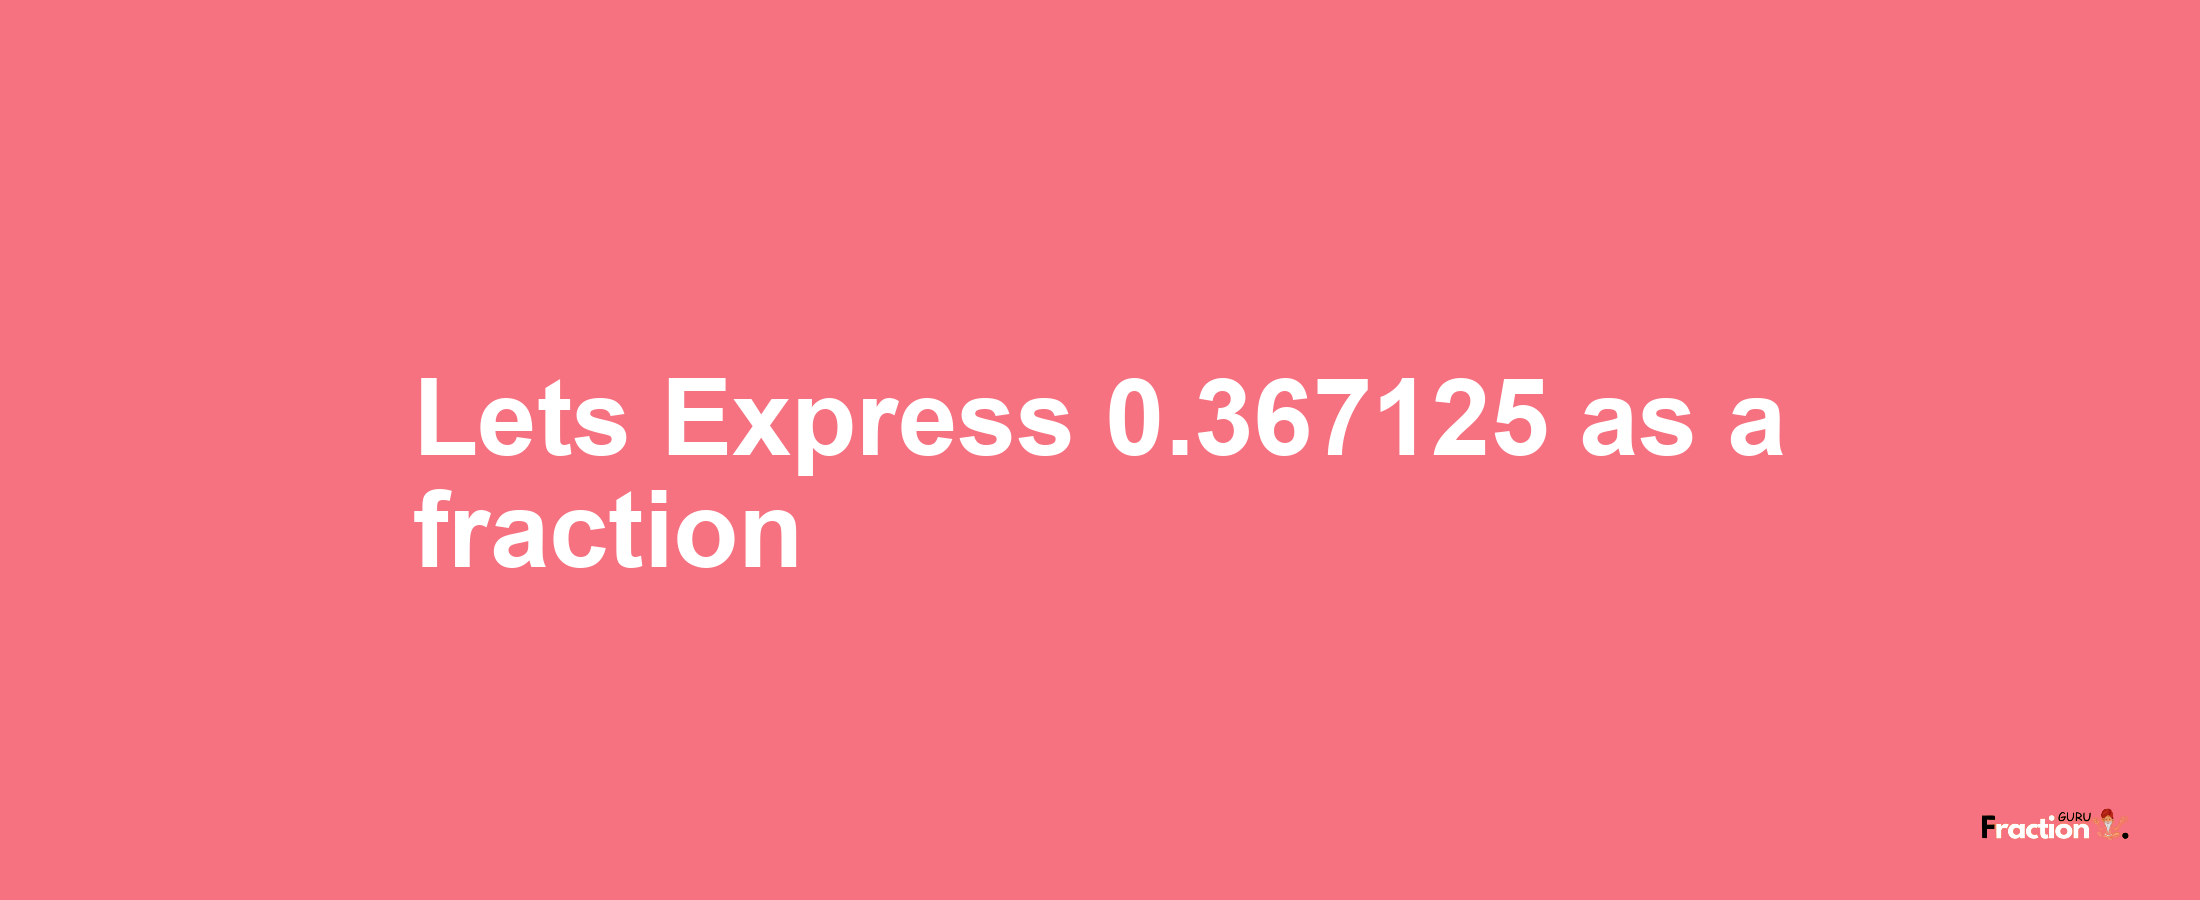 Lets Express 0.367125 as afraction